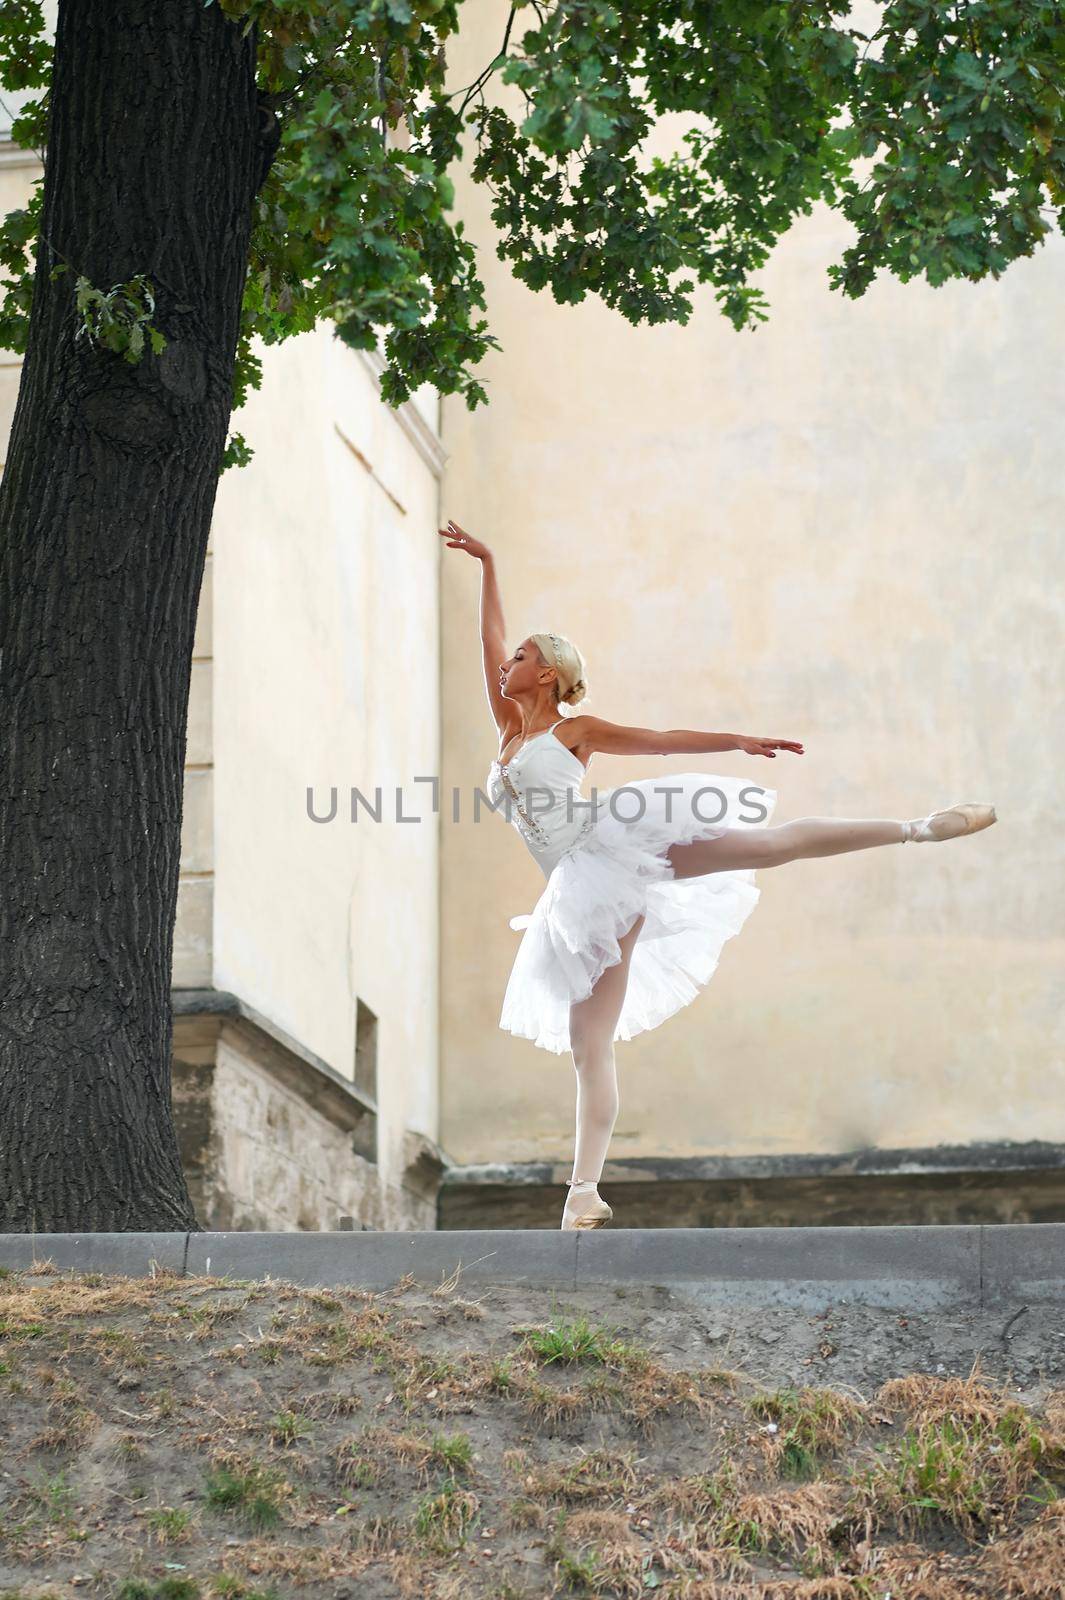 Vertical shot of a young female ballet dancer performing on the streets of the town.